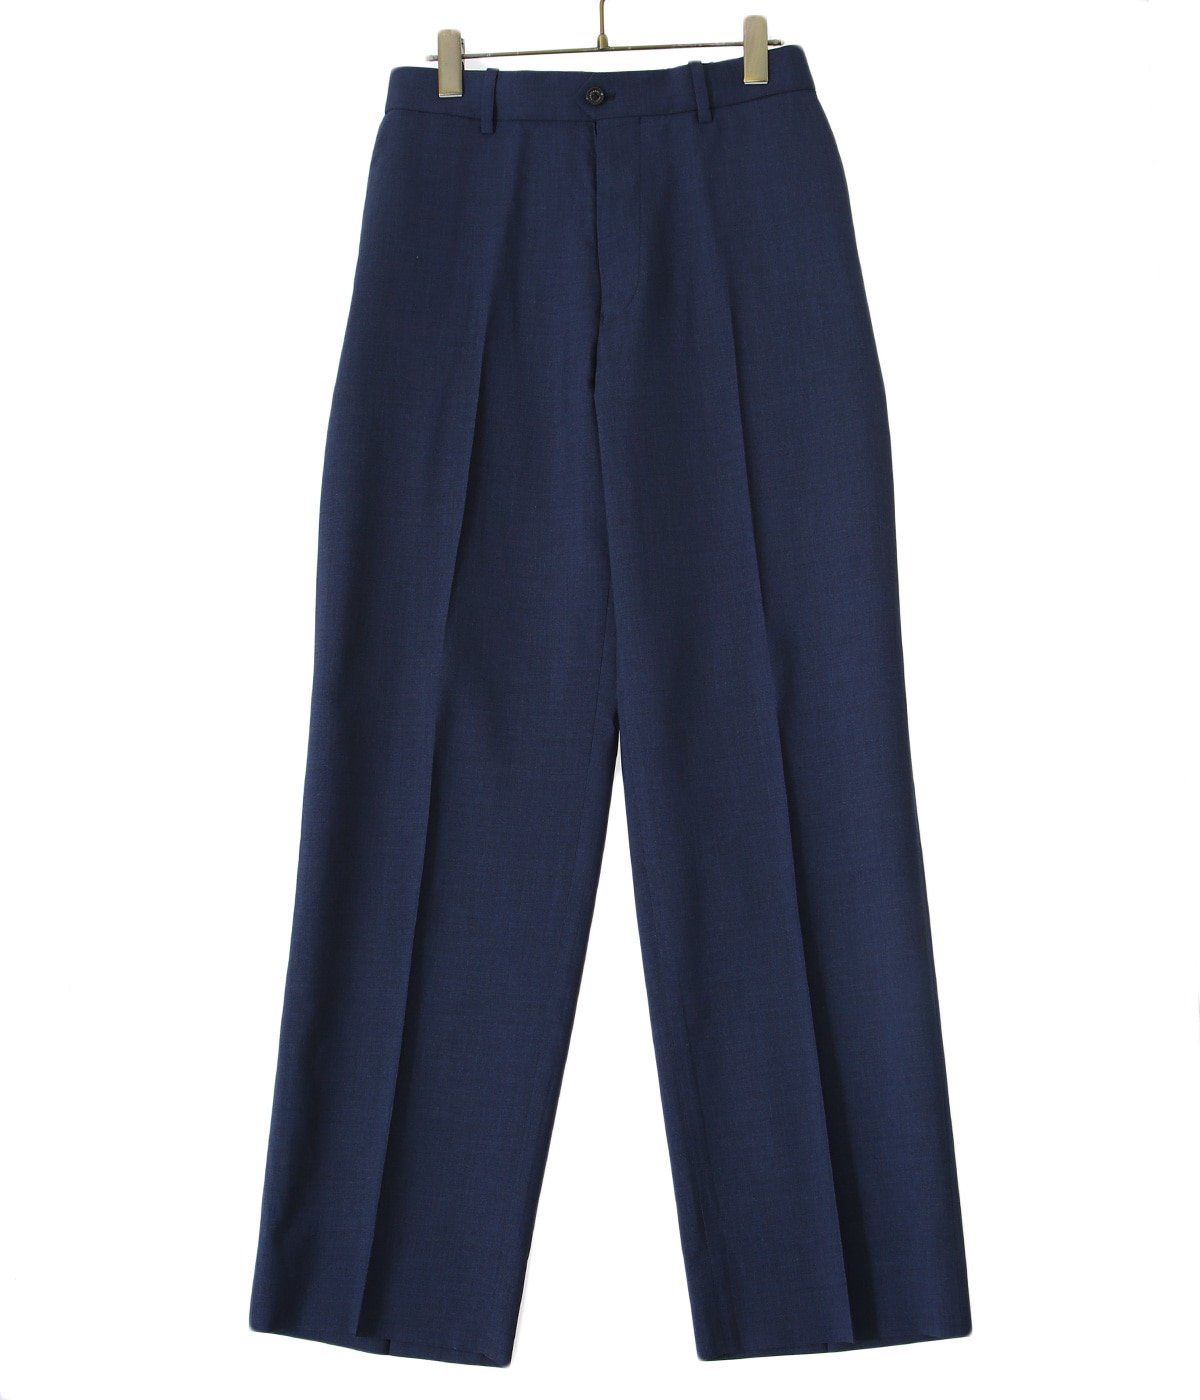 MARKAWARE(マーカウェア) FLAT FRONT TROUSERS - SUPER 120s WOOL 